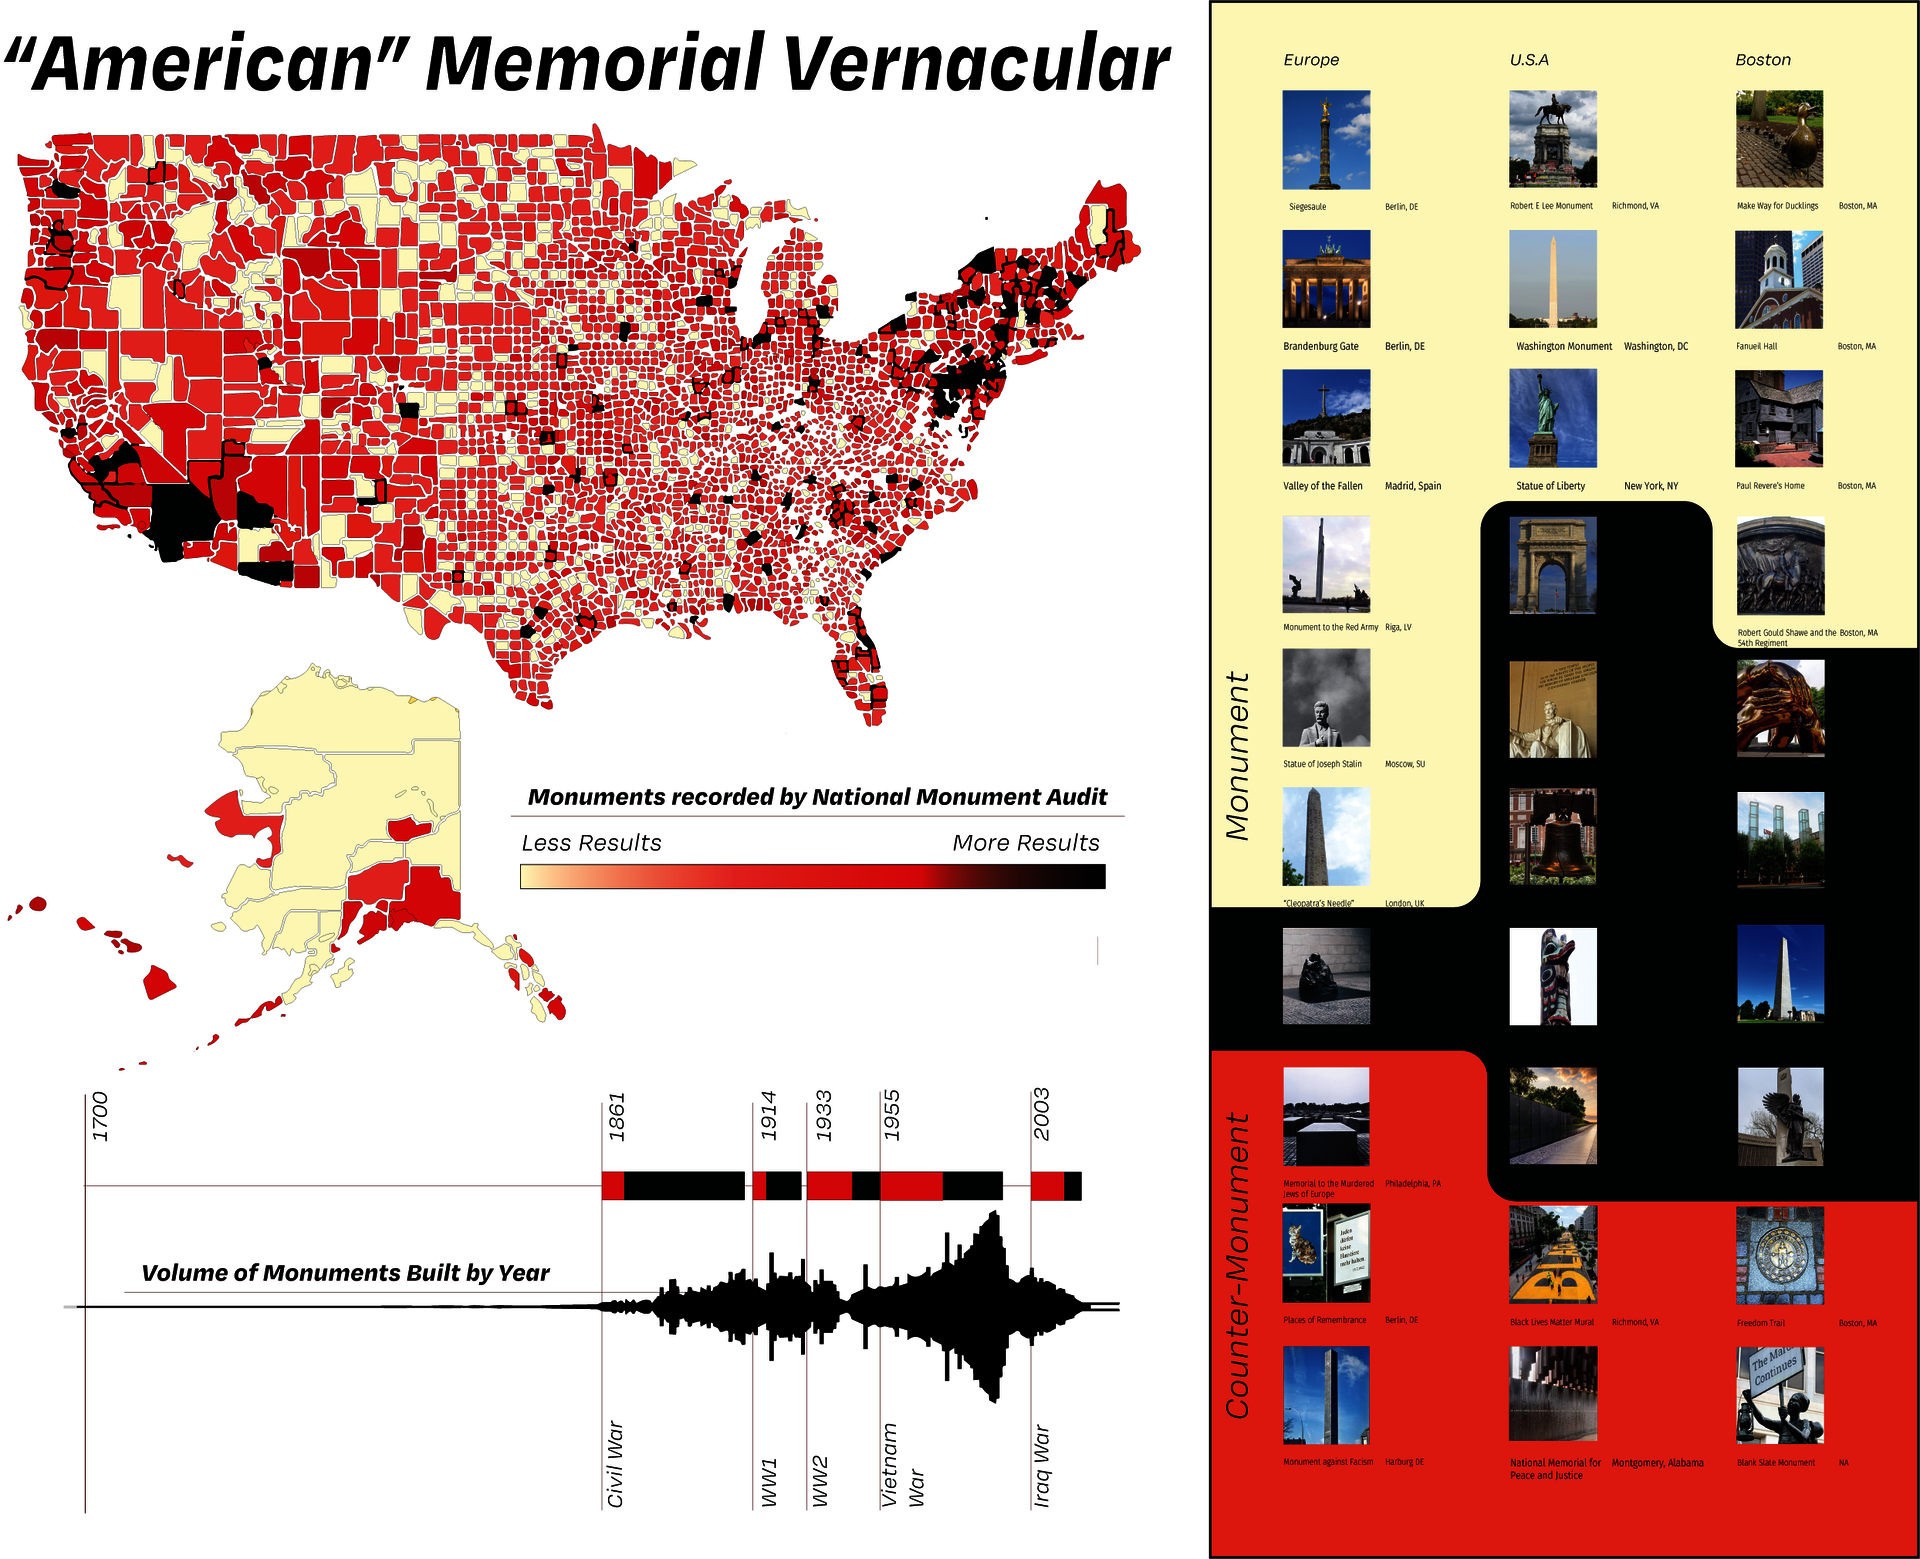 A Graphic depicting the volume and locations of monuments built in the U.S accompanied by a matrix on "American" Memorial Vernacular. The word American is in quotations as a great deal of historical monuments in the U.S. rely on neoclassical forms adopted from Roman and Greek traditions of vernacular architecture.